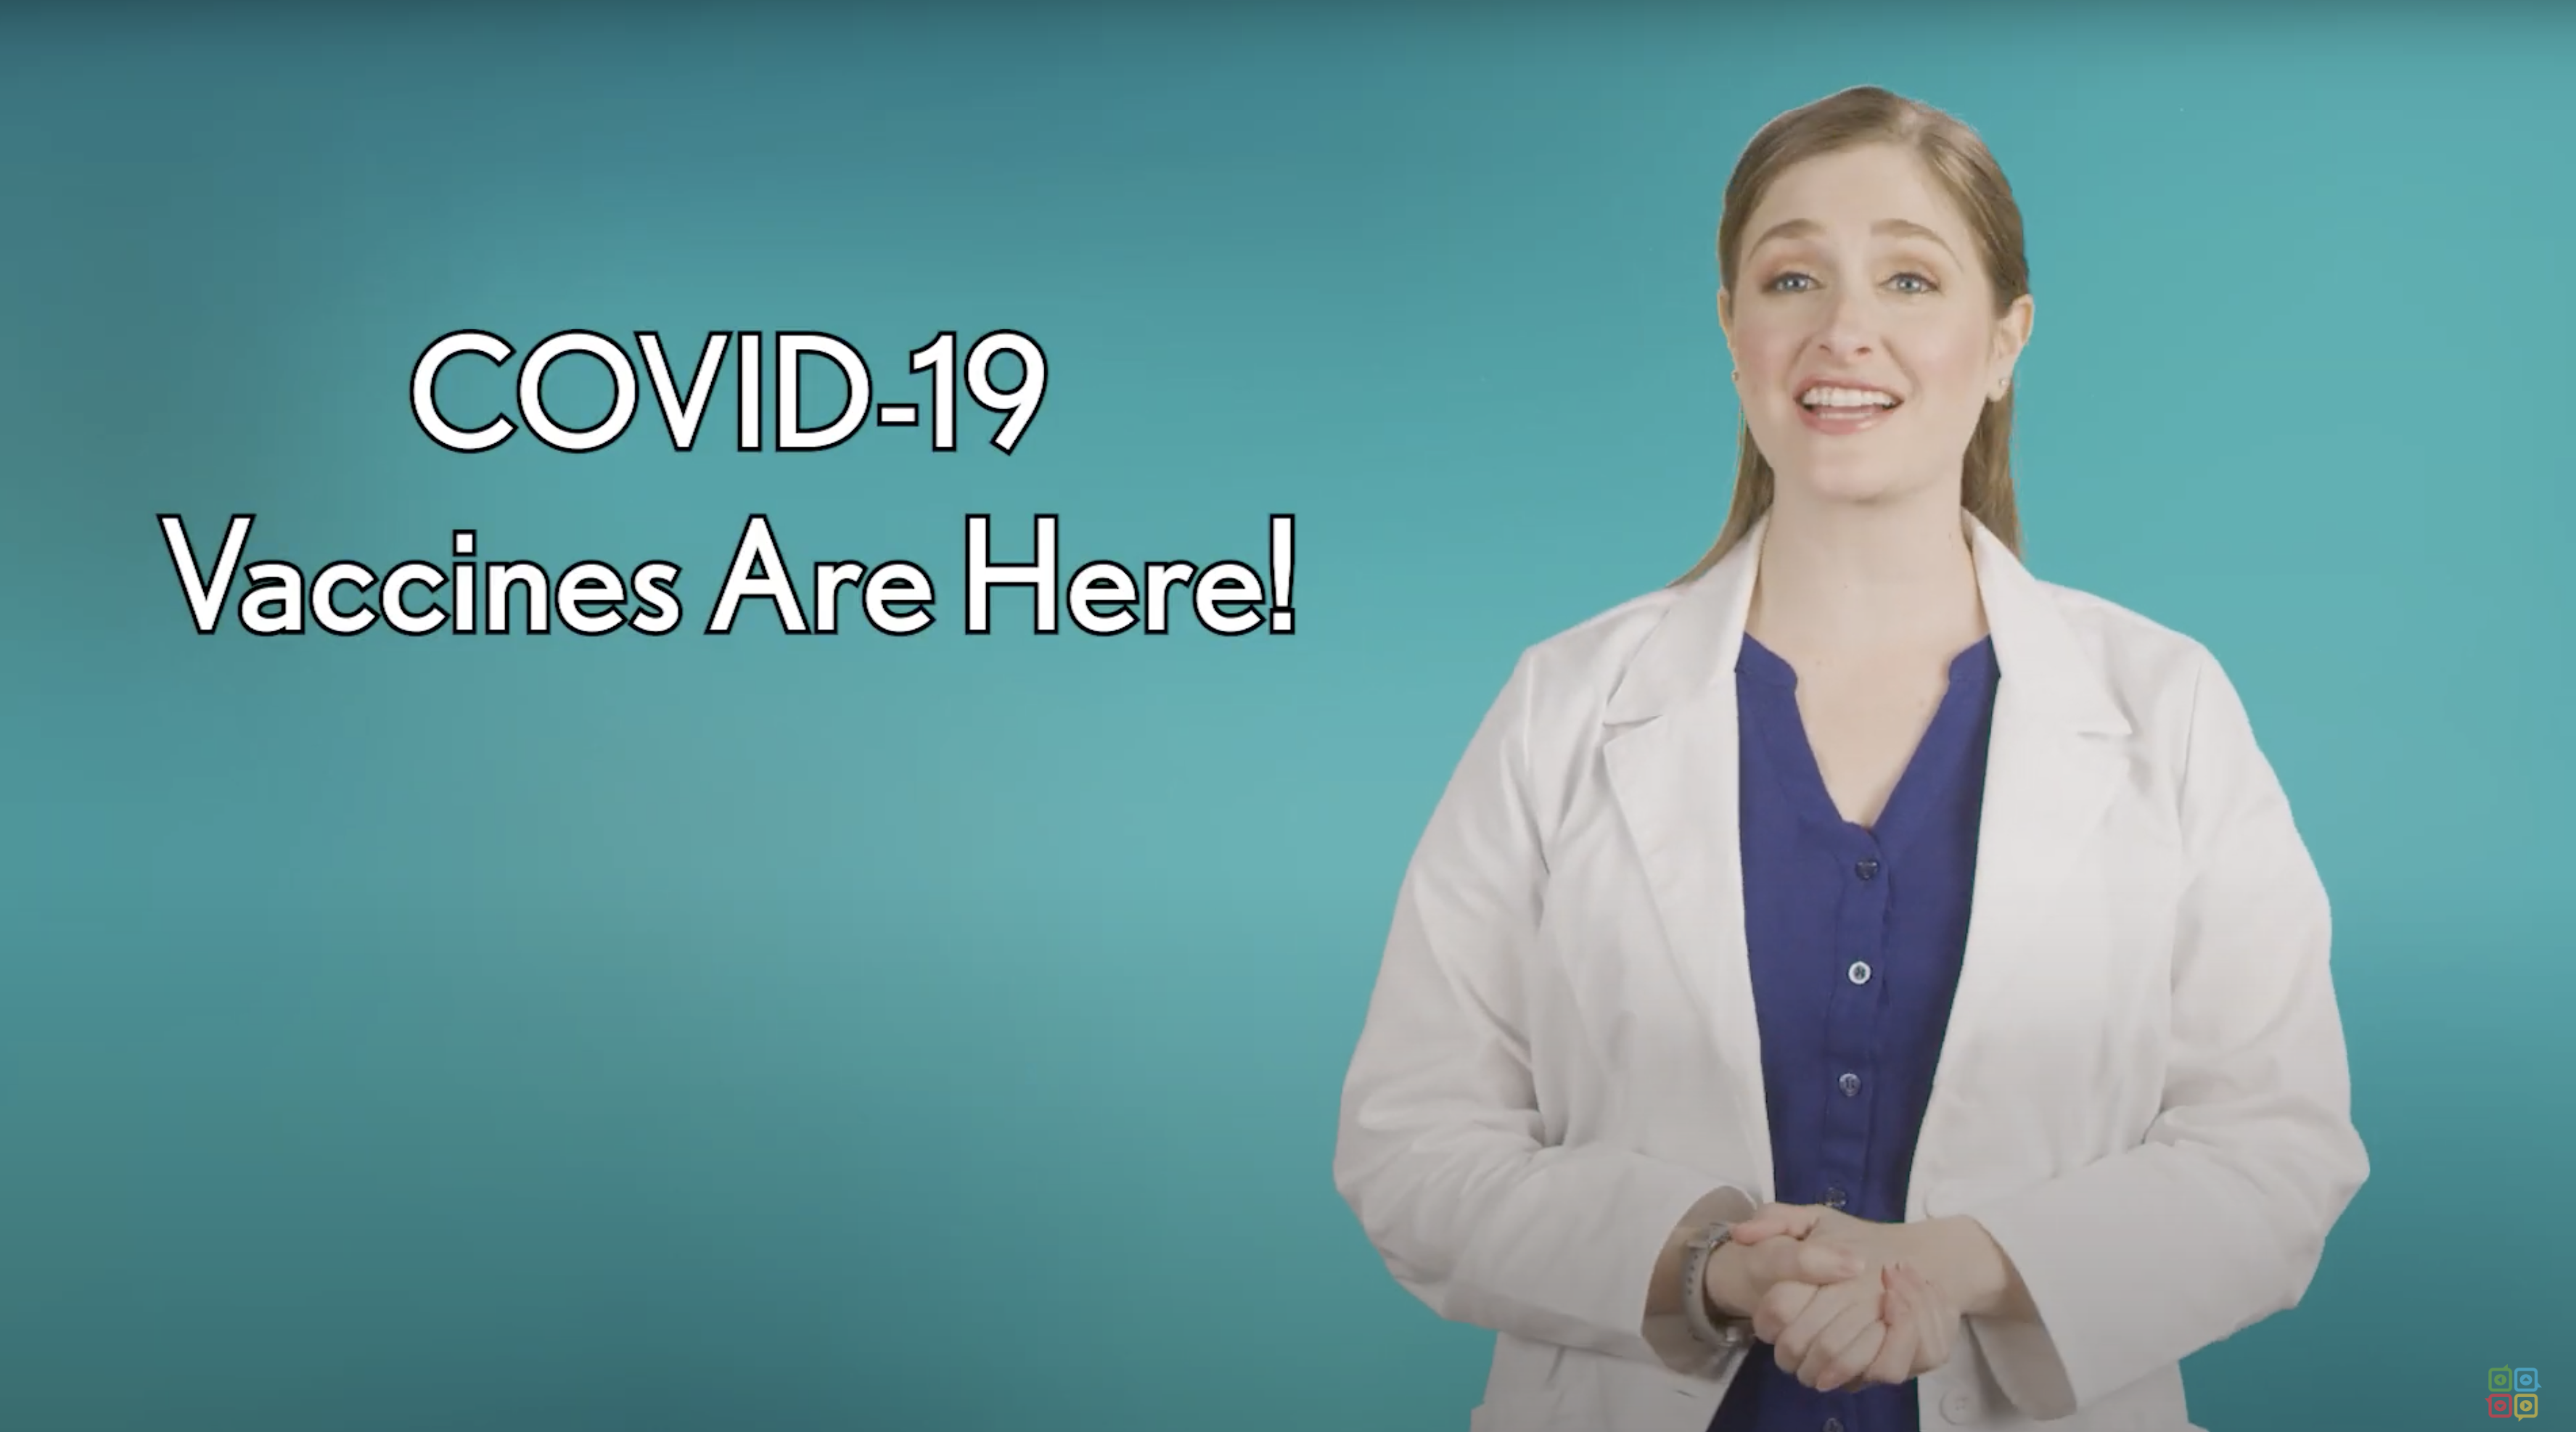 How Does the COVID-19 Vaccine Work?